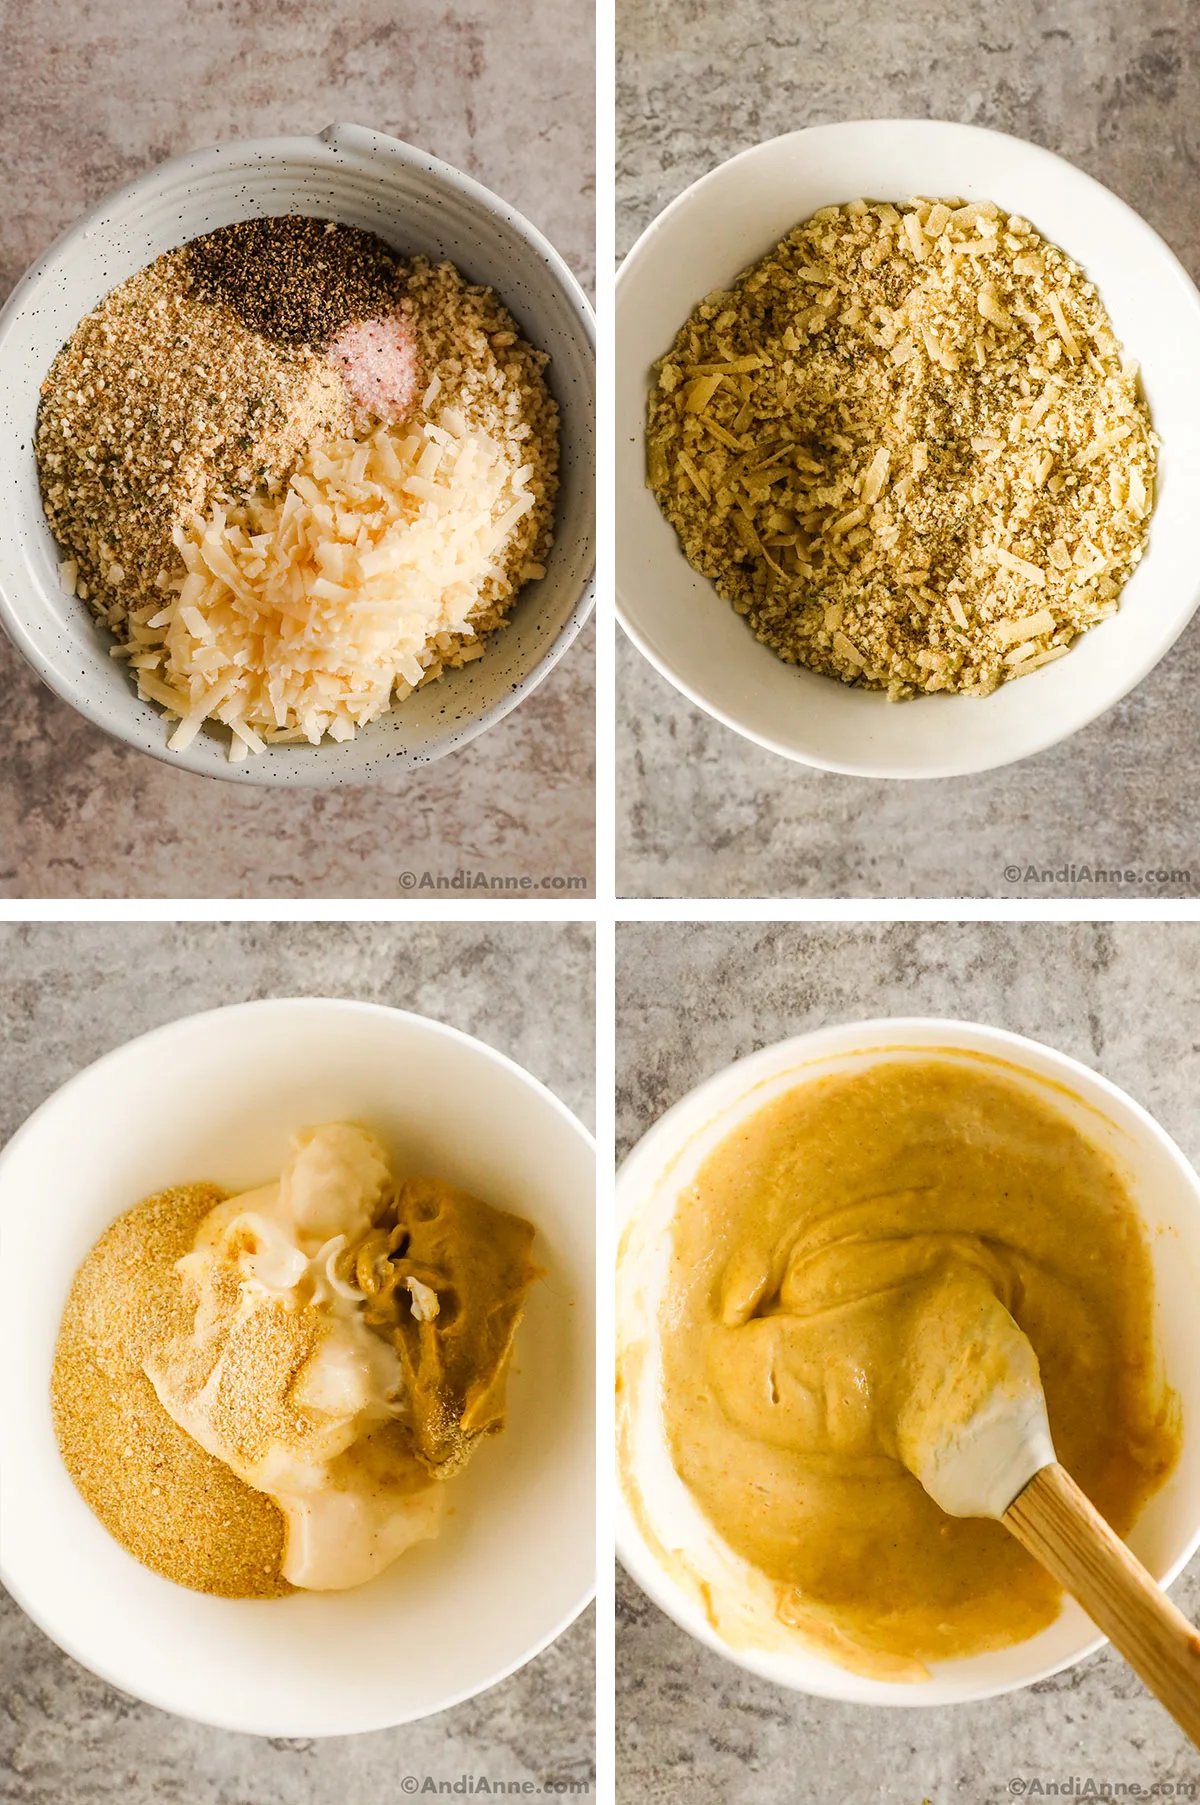 Four images grouped together. First two are parmesan, bread crumbs and spices unmixed and then mixed. Second two are bowl of mayo, mustard and spices unmixed and then mixed.